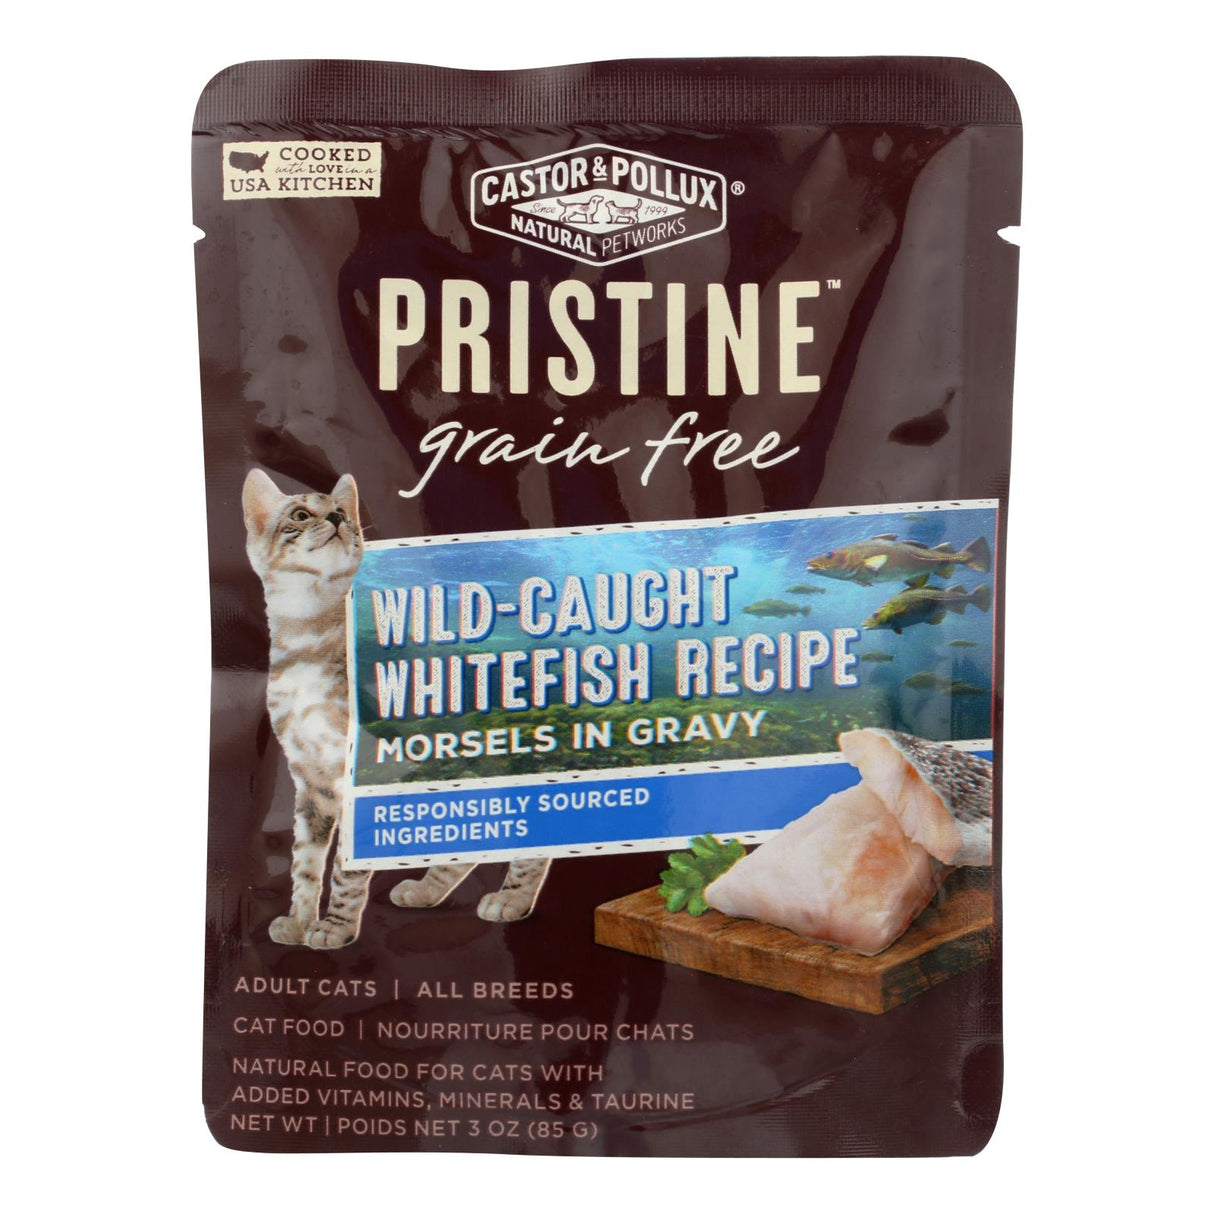 Castor and Pollux Grain-Free Wild Whitefish Morsels for Cats (Pack of 24 - 3 oz.) - Cozy Farm 